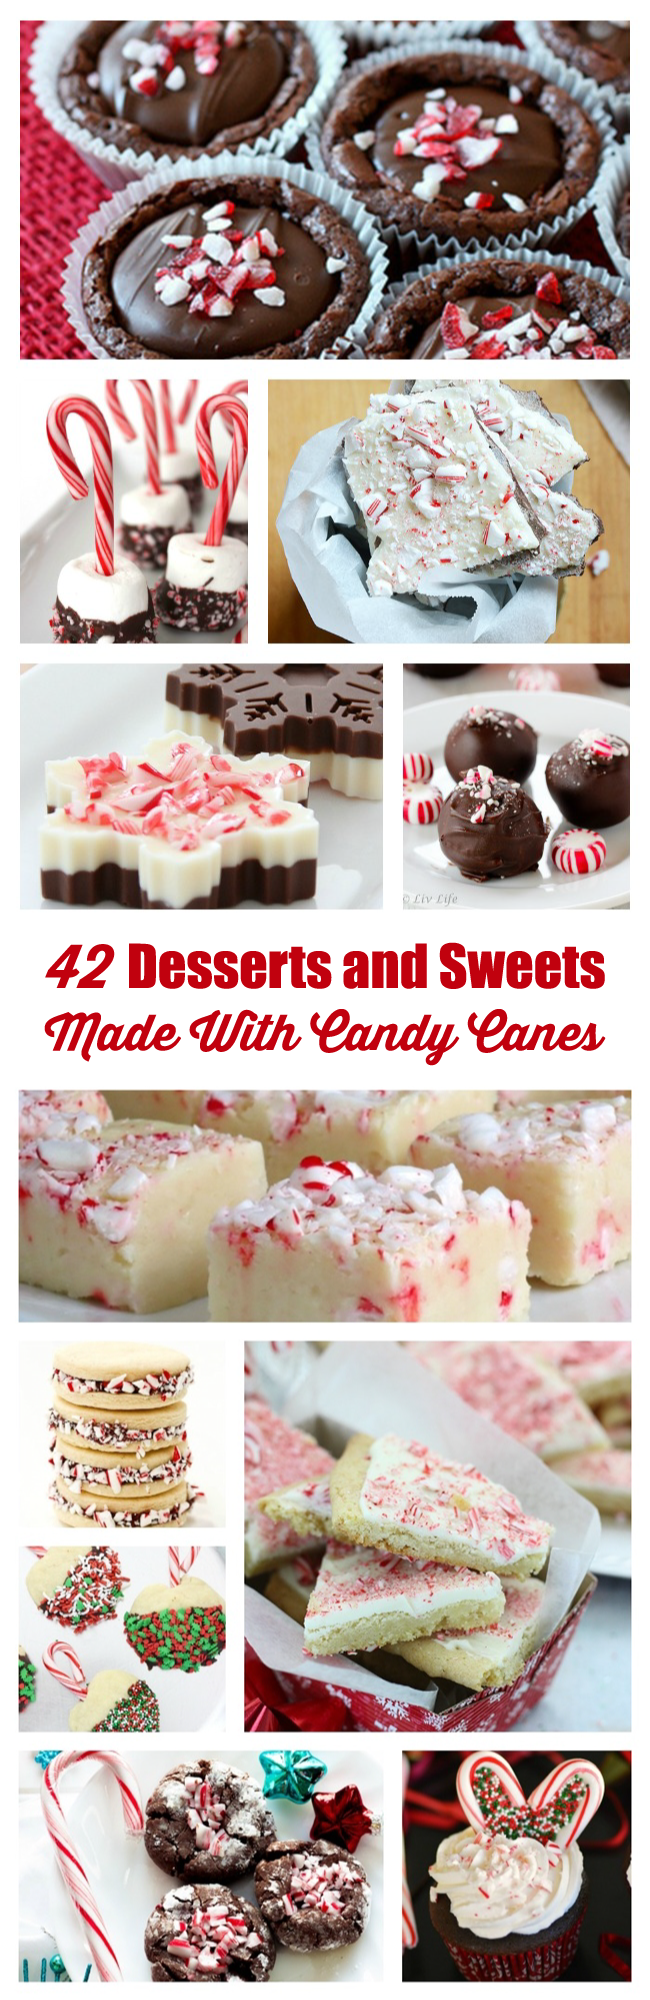 42 Desserts and sweets made with candy canes